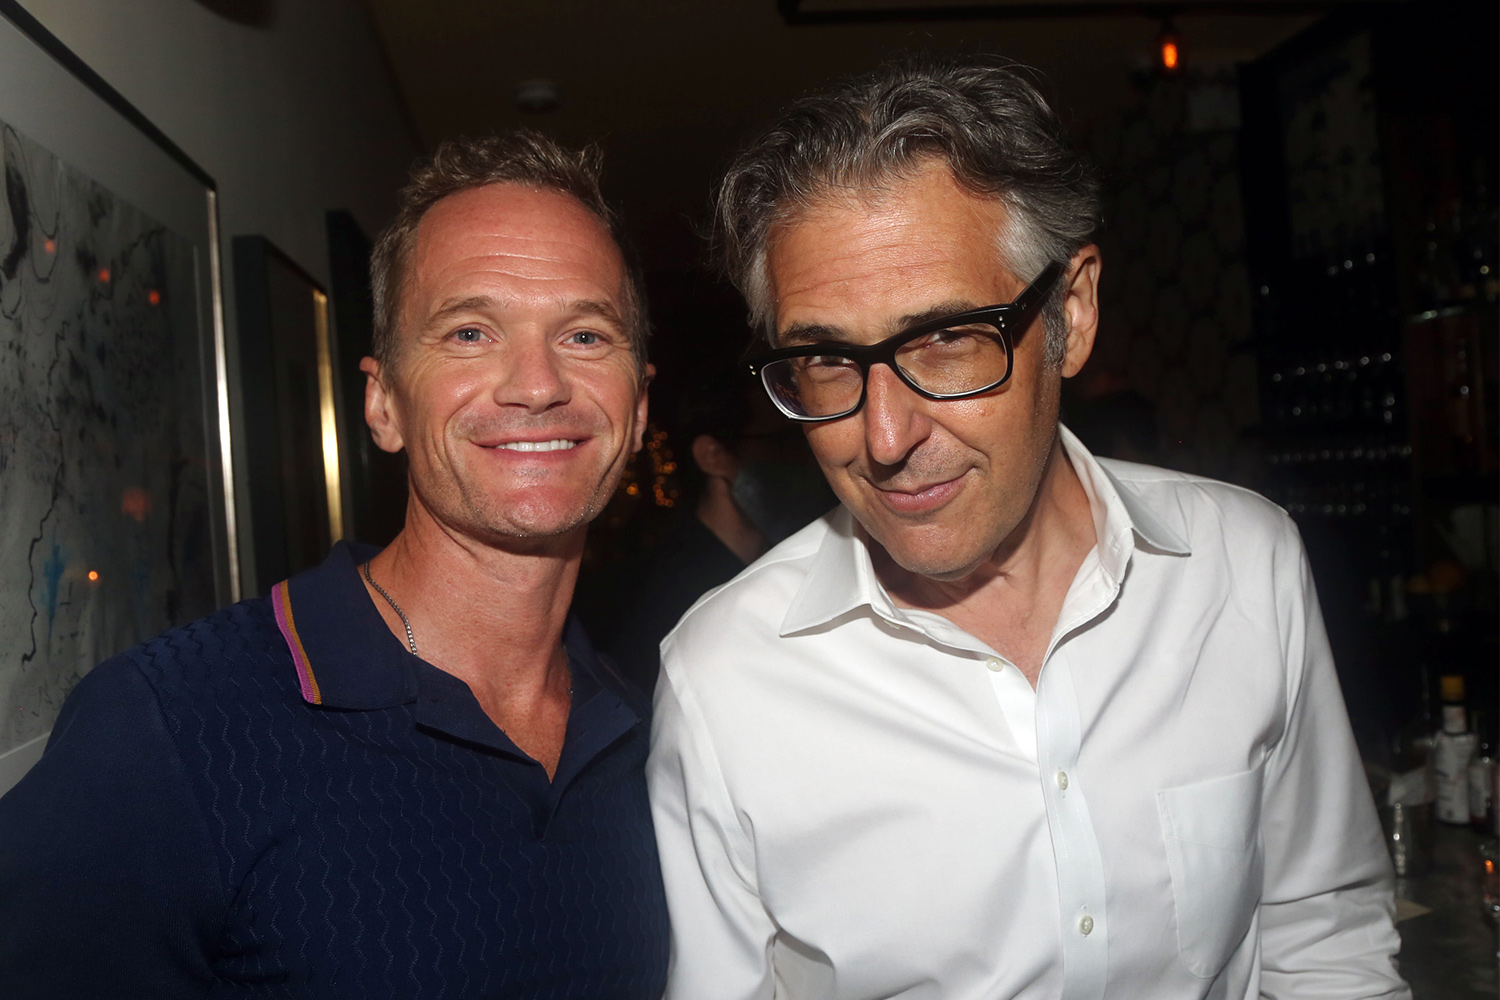 Neil Patrick Harris and Ira Glass pose for a photo